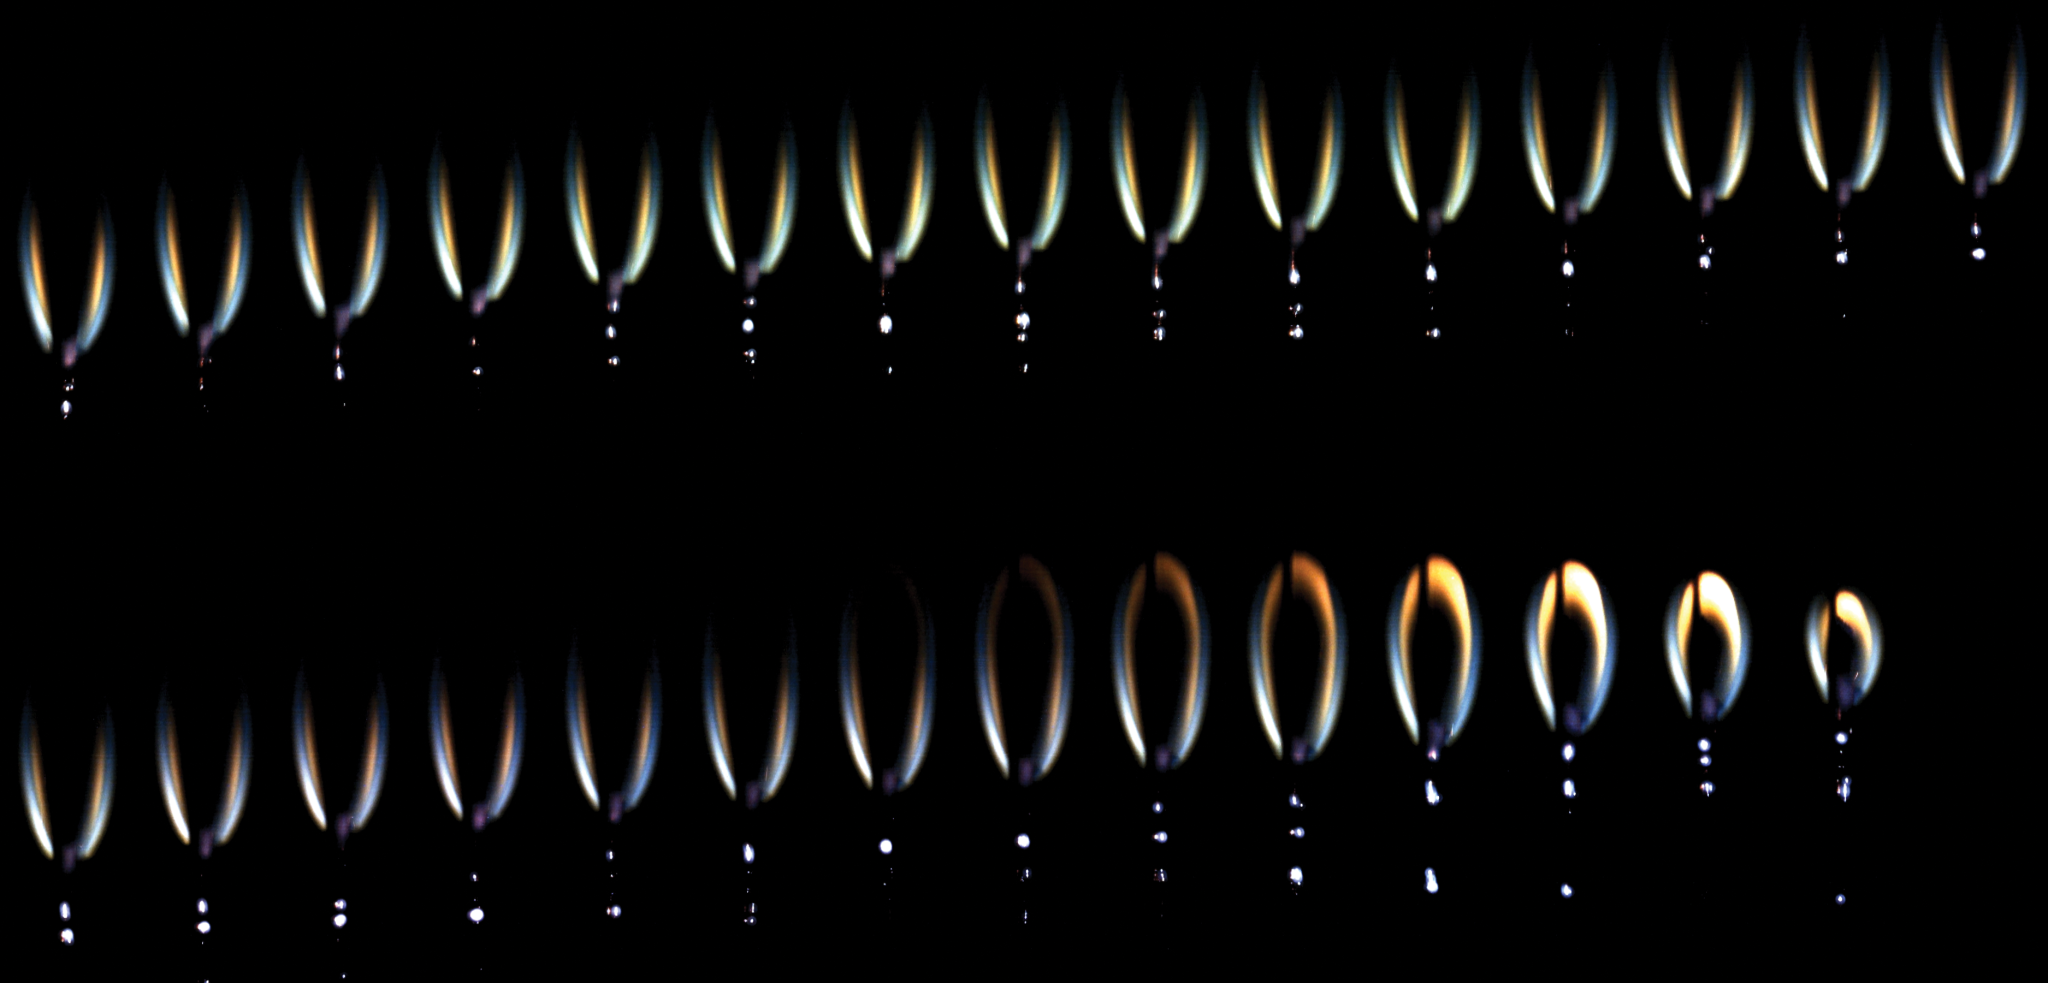 image showing different flames formed during the experiment